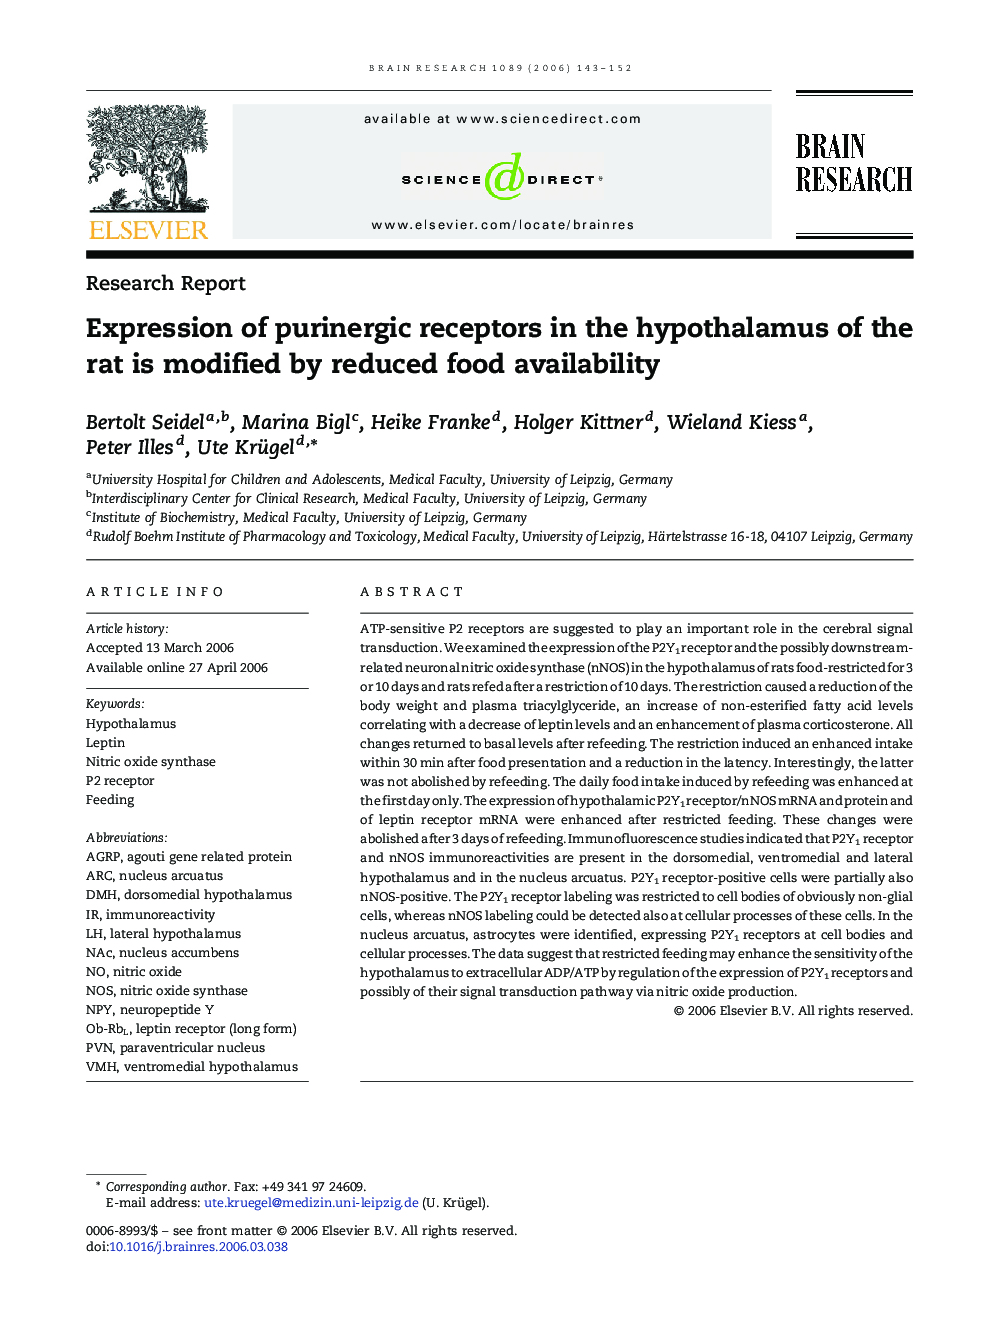 Expression of purinergic receptors in the hypothalamus of the rat is modified by reduced food availability